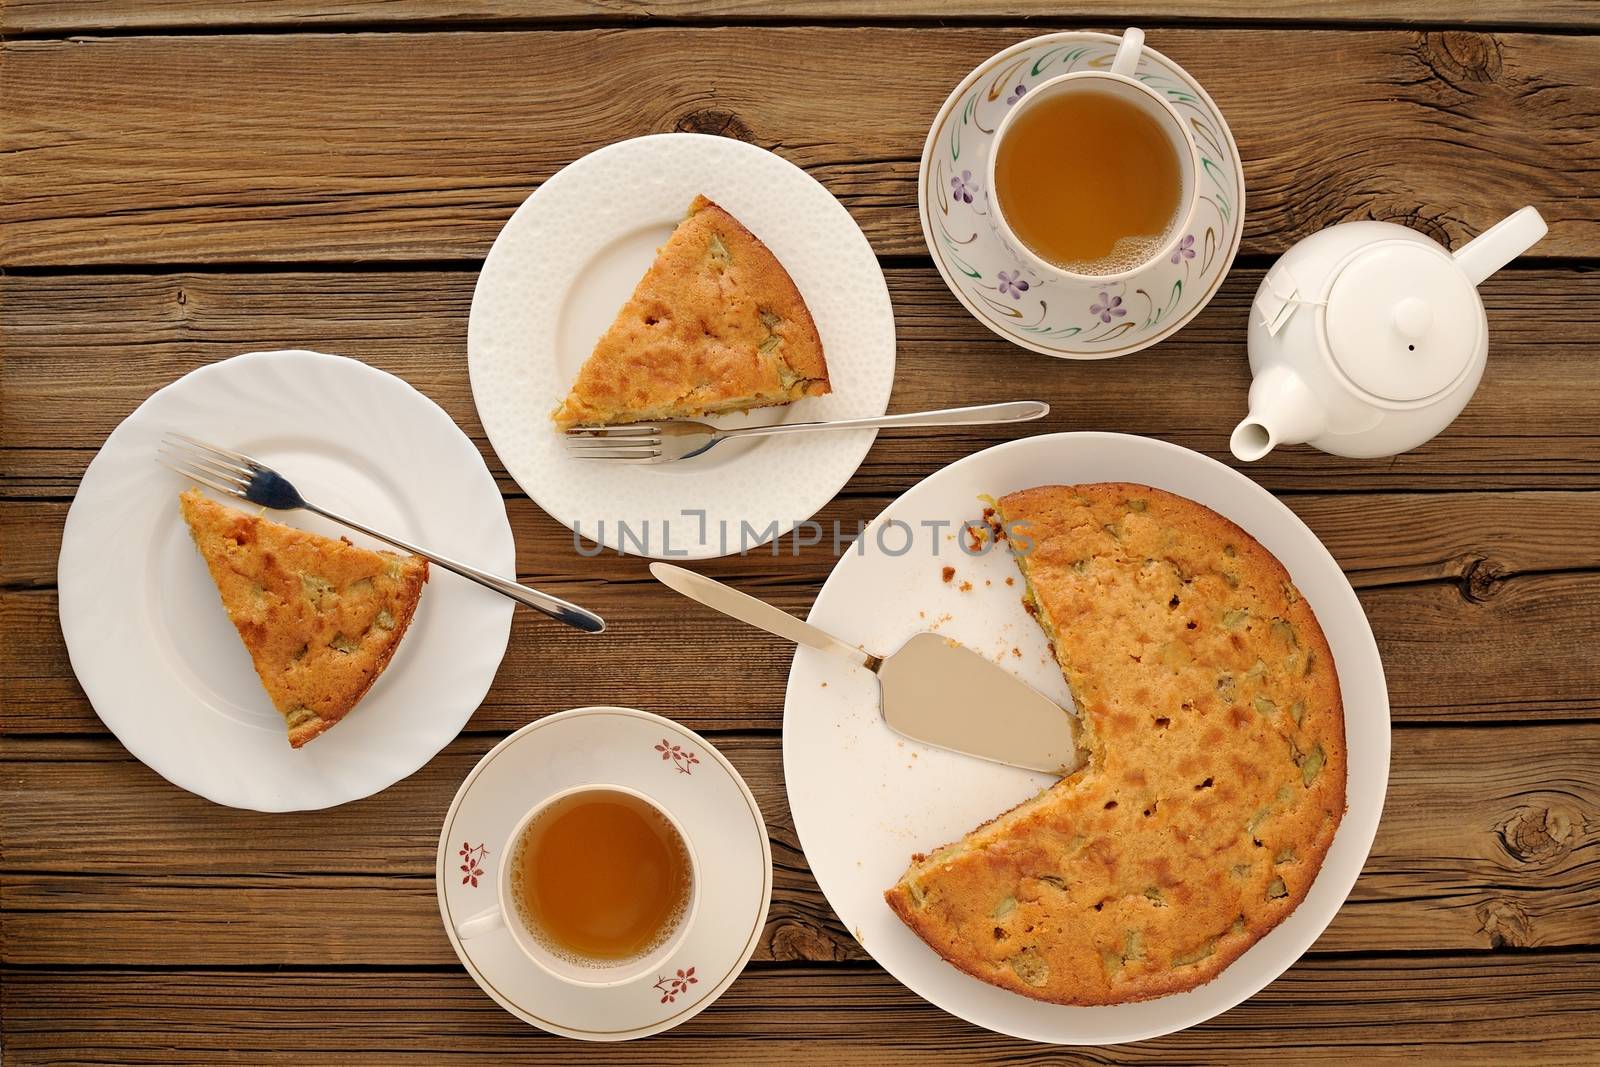 Old fashioned apple pie with black tea on wooden background